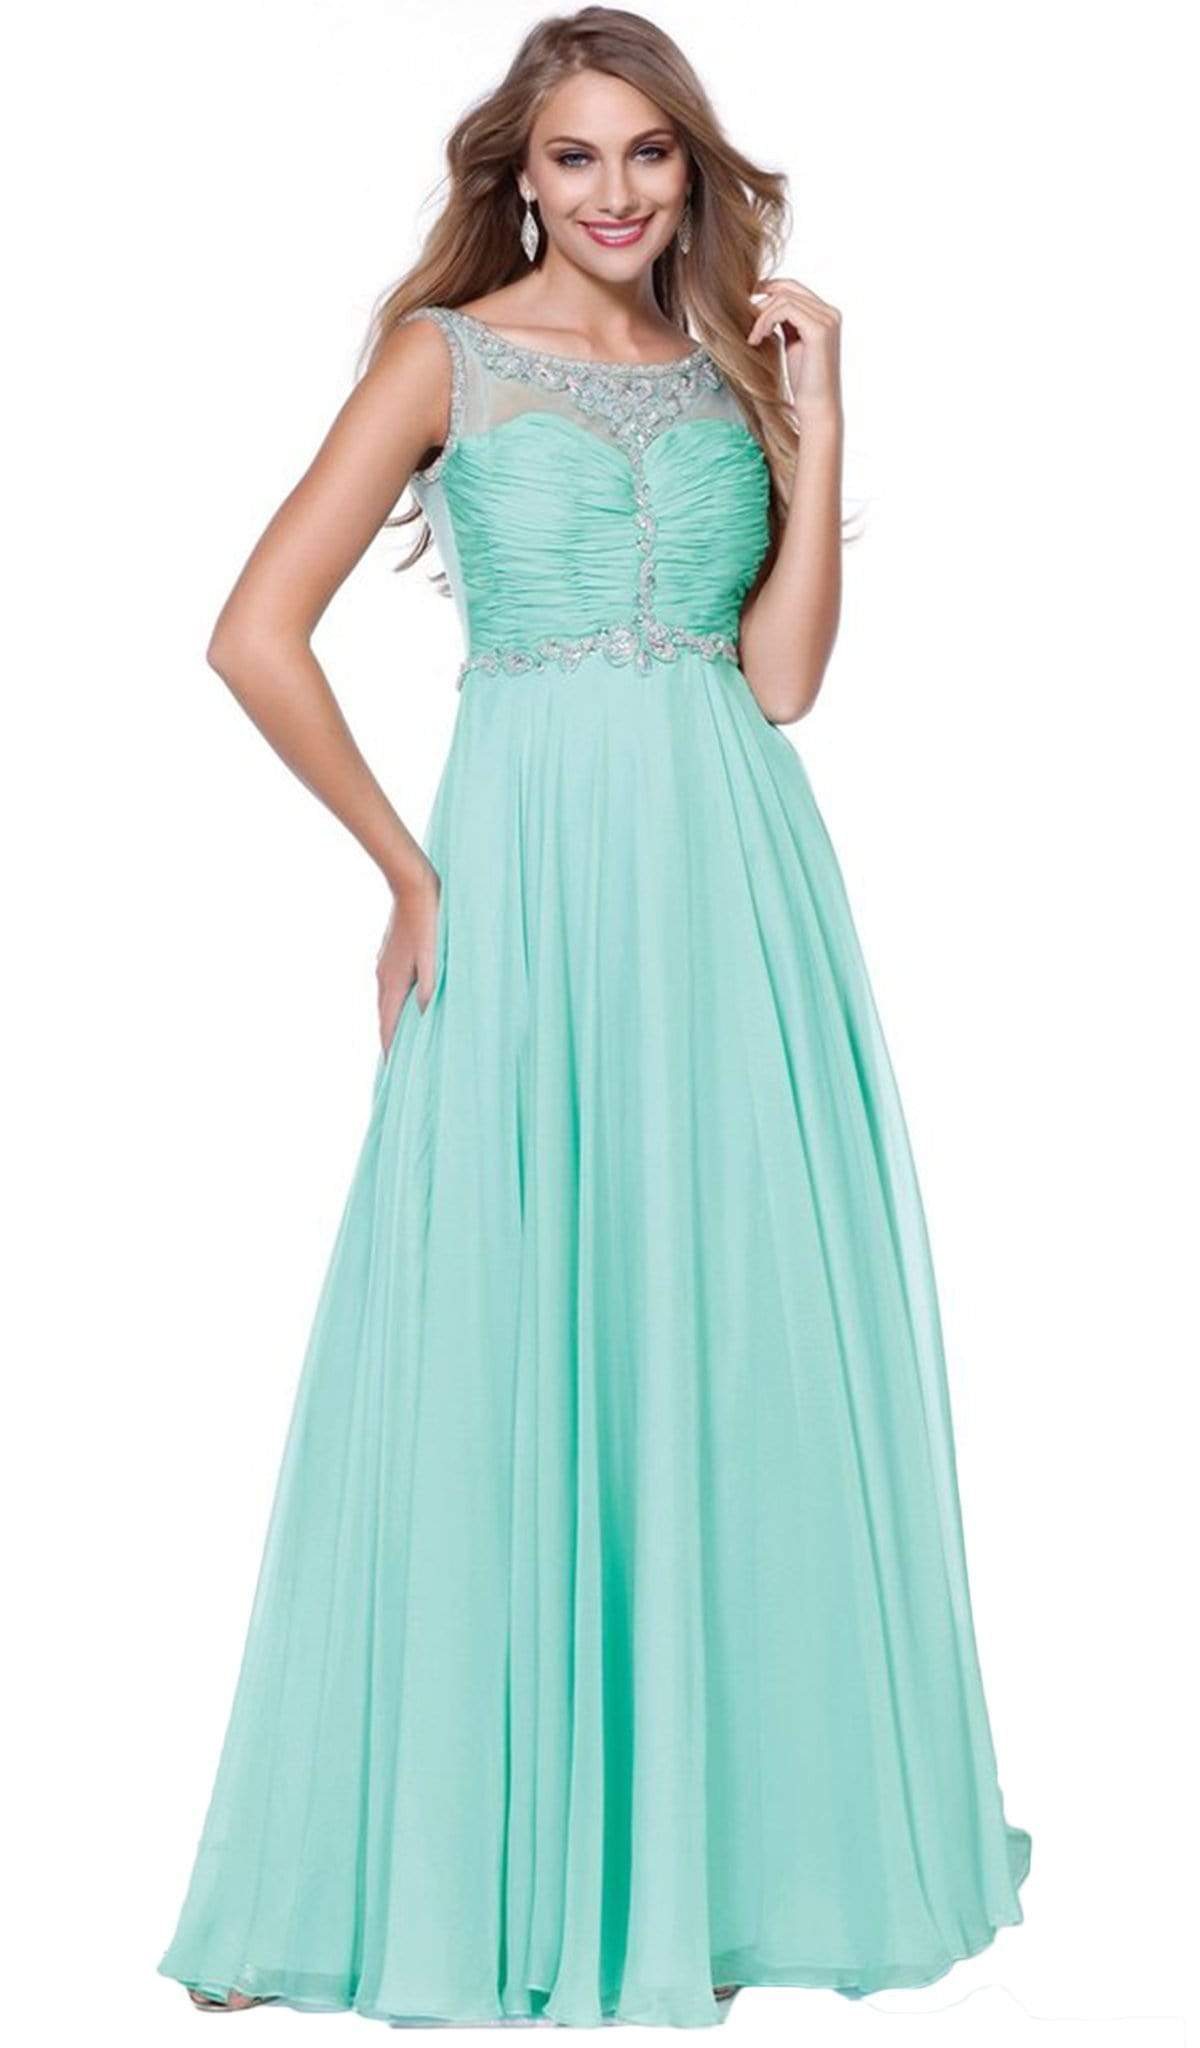 Nox Anabel - 8155 Bateau illusion Chiffon Gown Special Occasion Dress XS / Mint Green